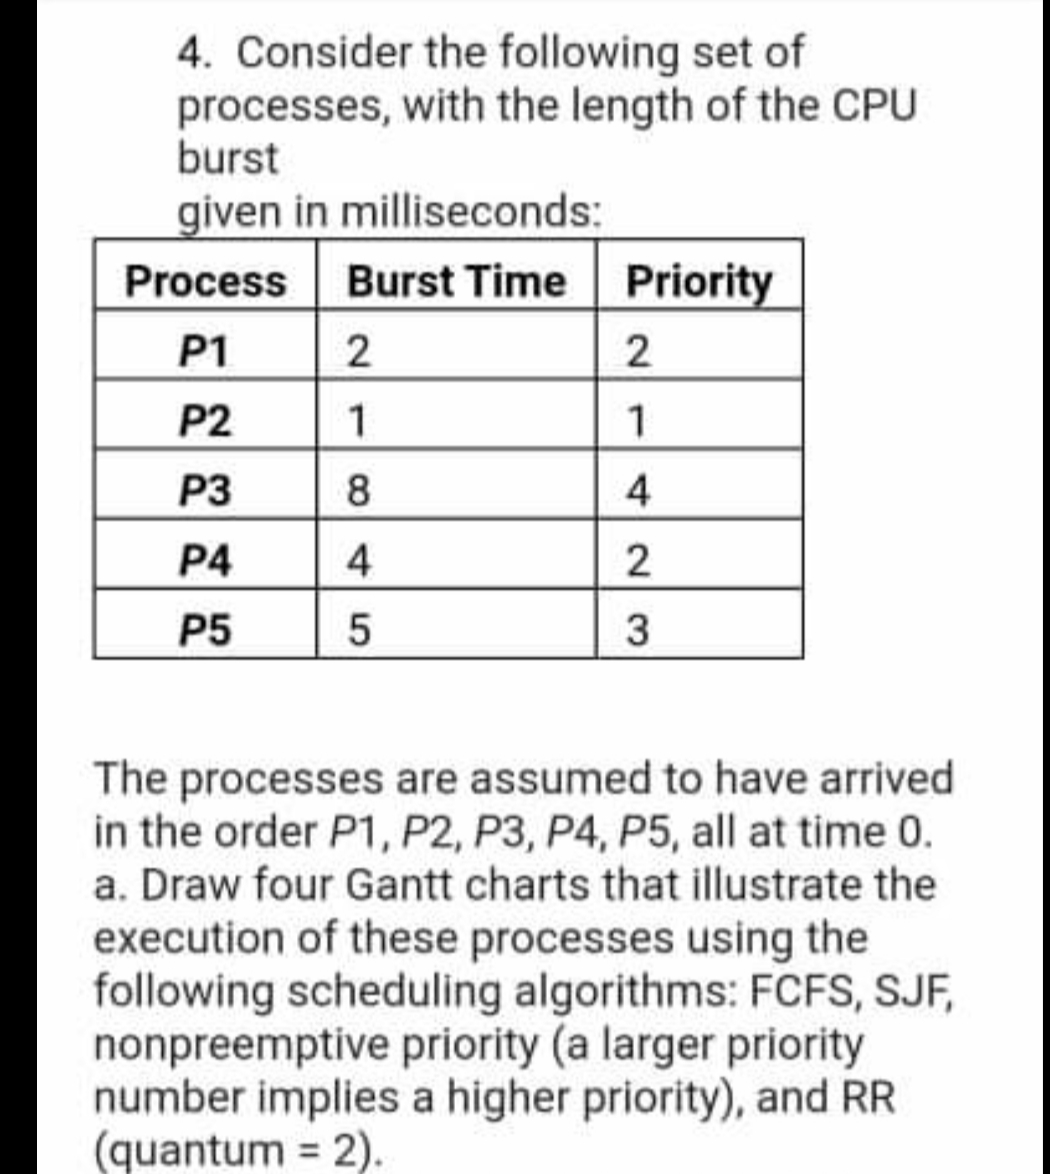 4. Consider the following set of
processes, with the length of the CPU
burst
given in milliseconds:
Process
Burst Time Priority
P1
2
P2
1
1
P3
8.
4
P4
4
P5
The processes are assumed to have arrived
in the order P1, P2, P3, P4, P5, all at time 0.
a. Draw four Gantt charts that illustrate the
execution of these processes using the
following scheduling algorithms: FCFS, SJF,
nonpreemptive priority (a larger priority
number implies a higher priority), and RR
(quantum = 2).
5
